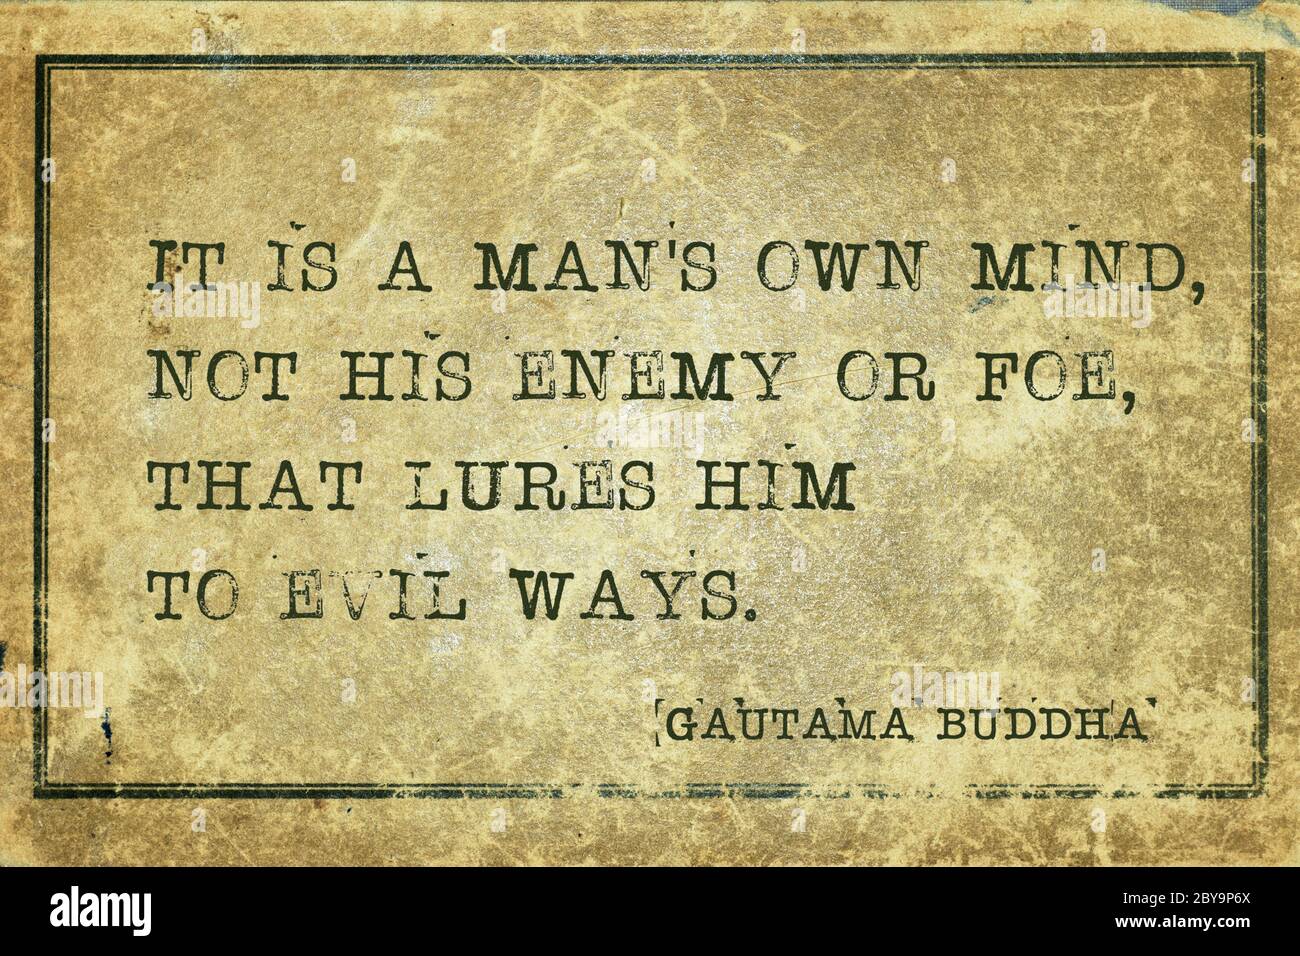 It is a man's own mind, not his enemy or foe, that lures him to evil ways - famous quote of Gautama Buddha printed on grunge vintage cardboard Stock Photo